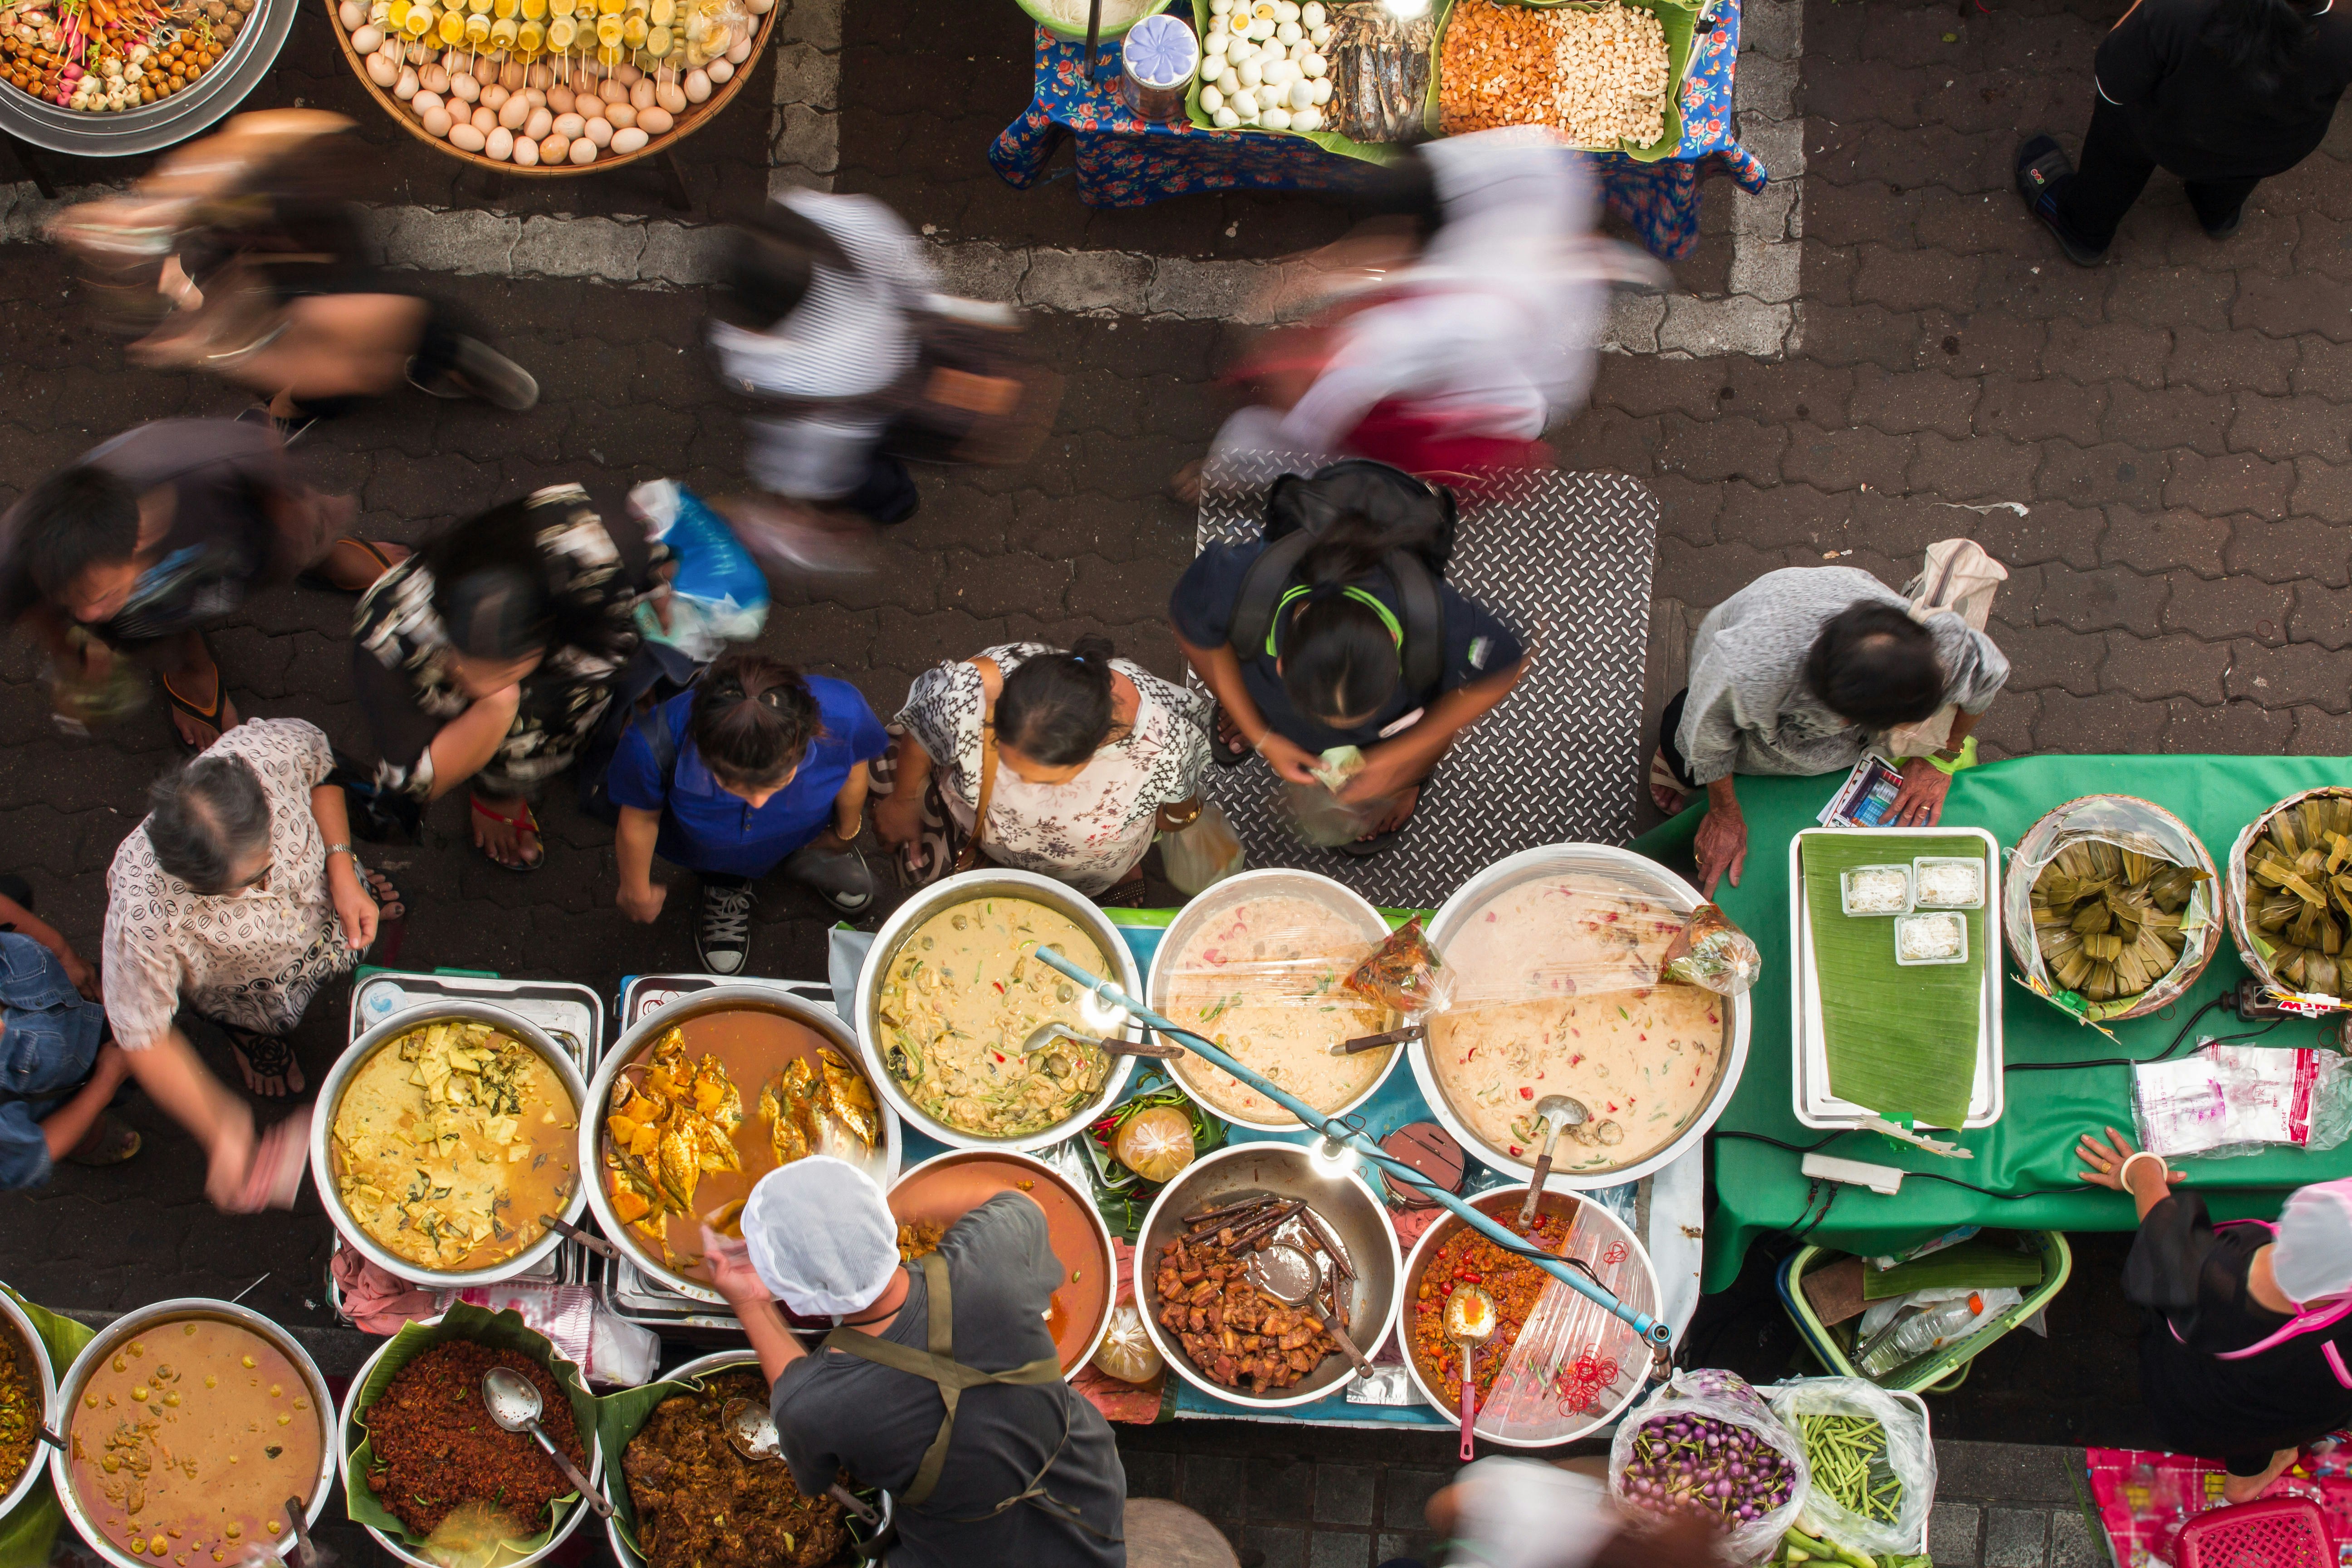 Overhead shot of a market in Bangkok, with street food in large circular bowls